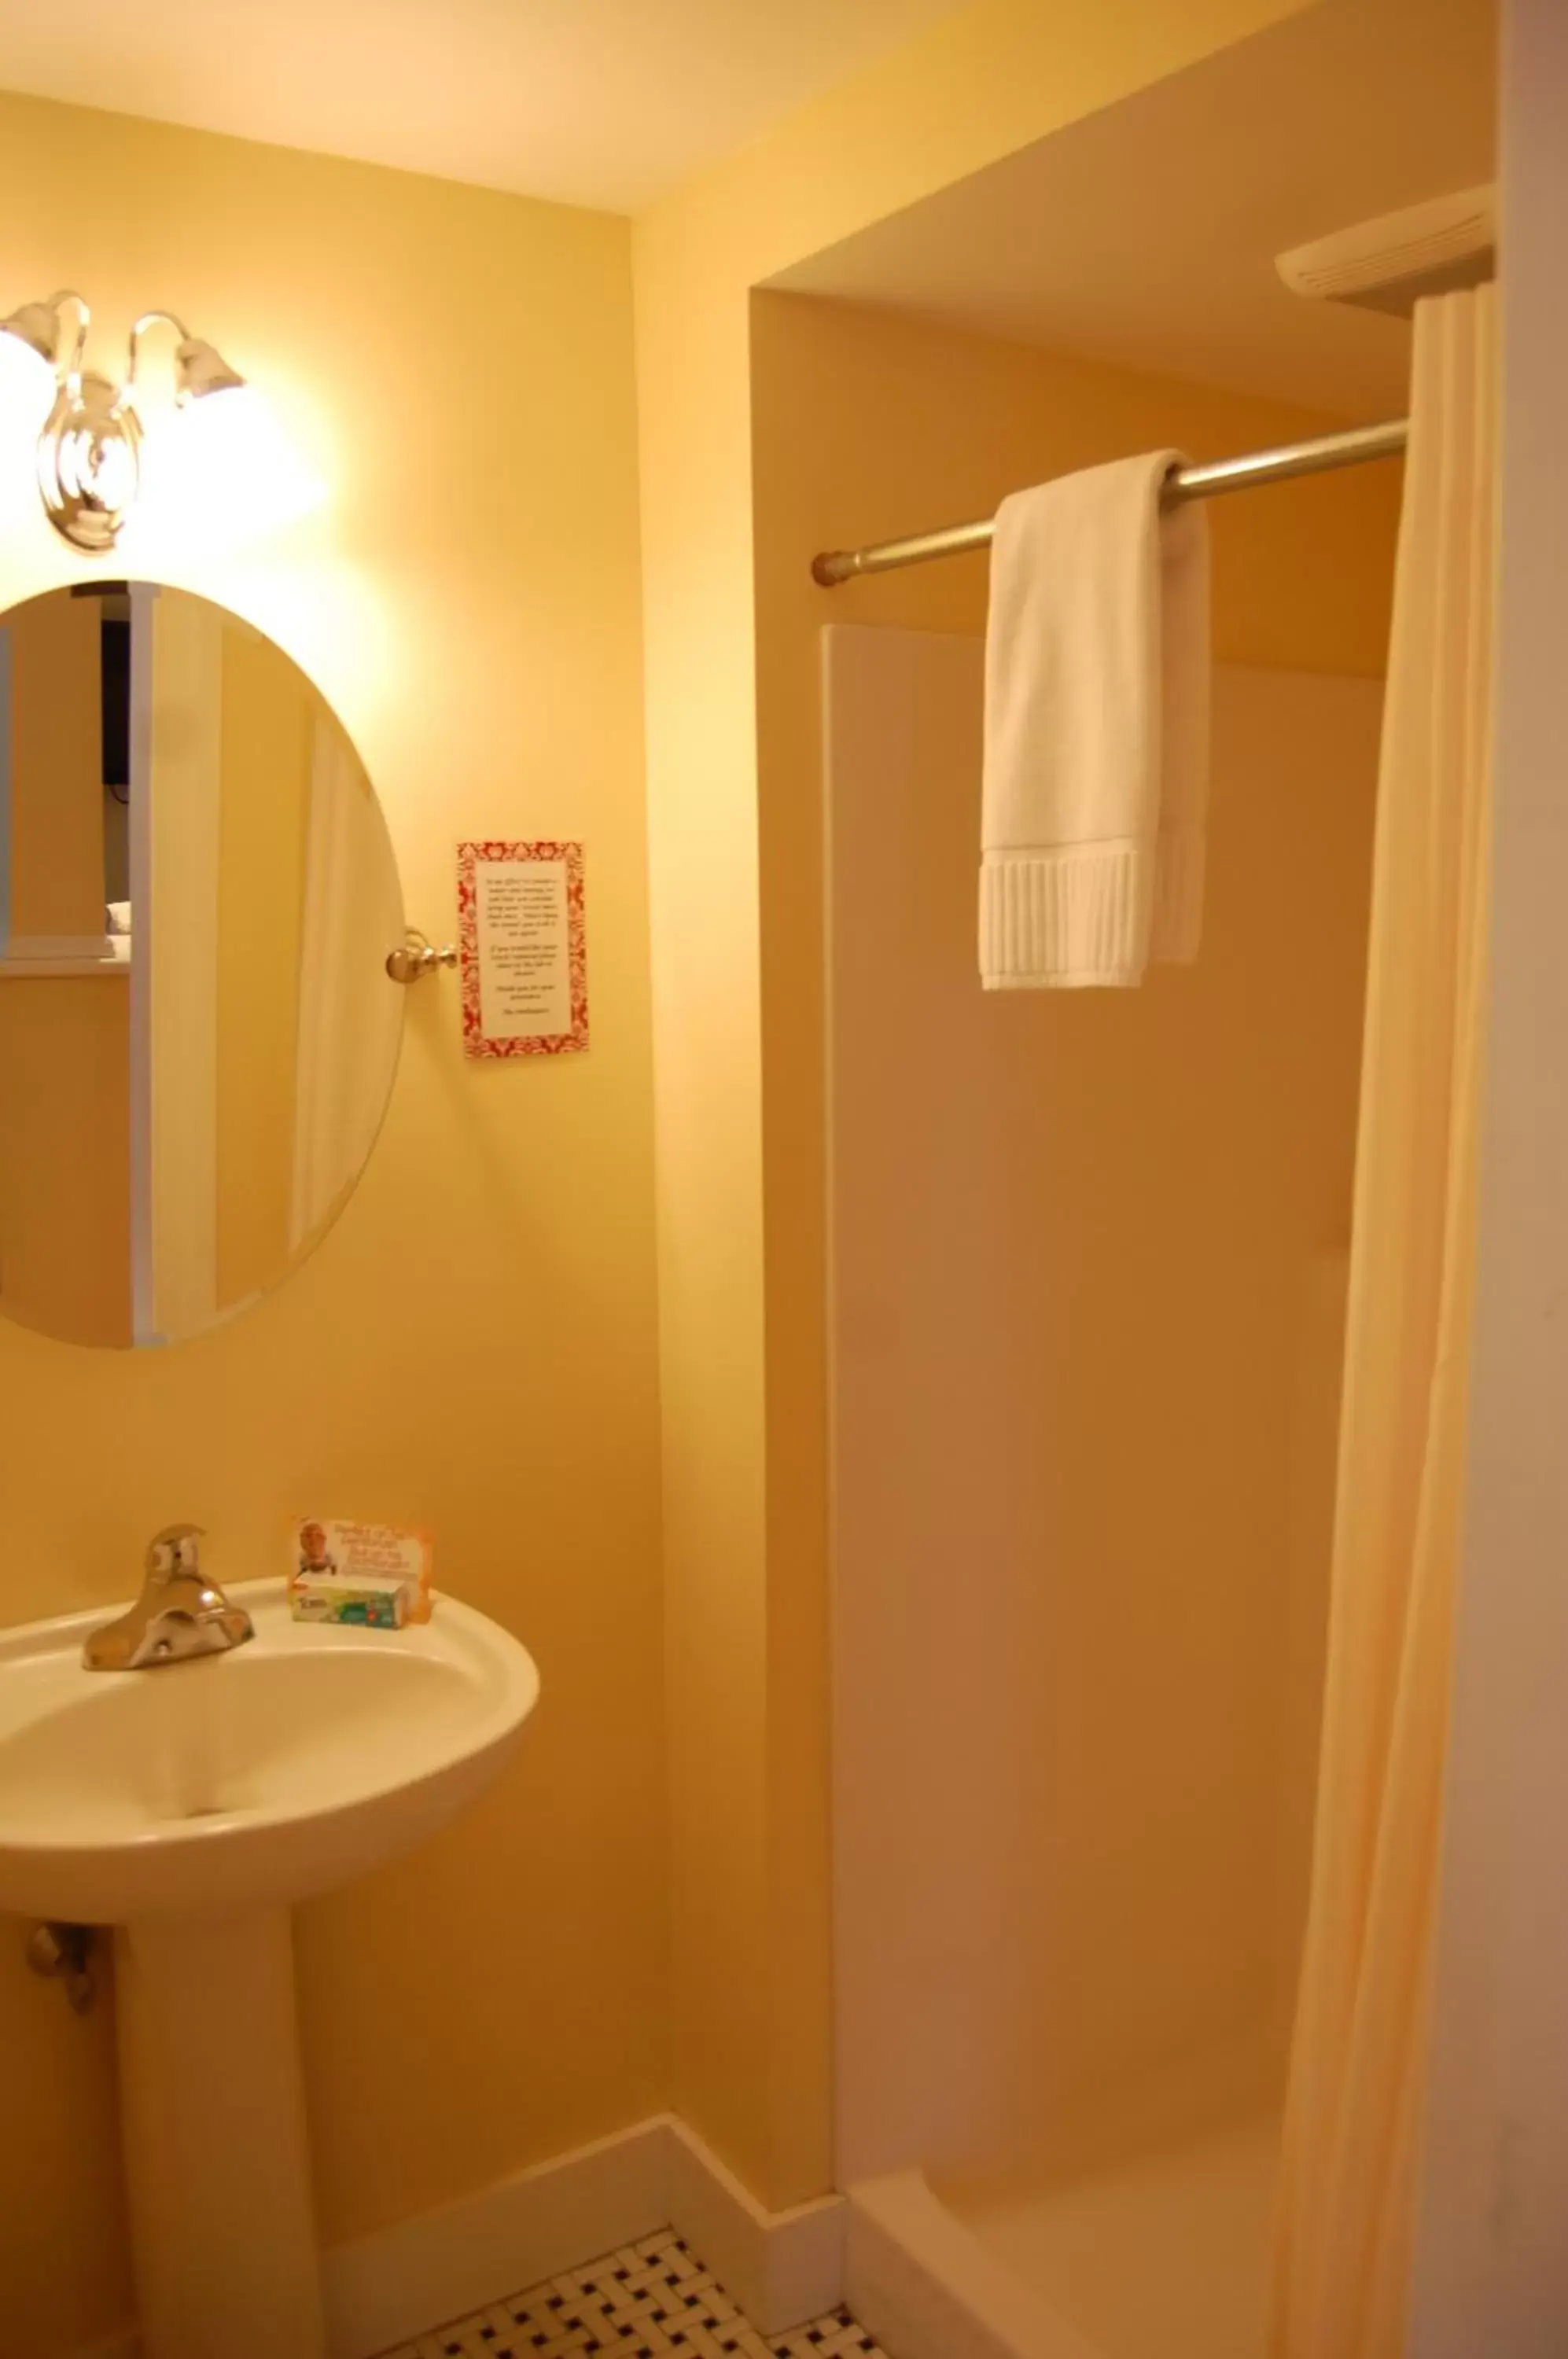 Bathroom in Cranmore Inn and Suites, a North Conway boutique hotel